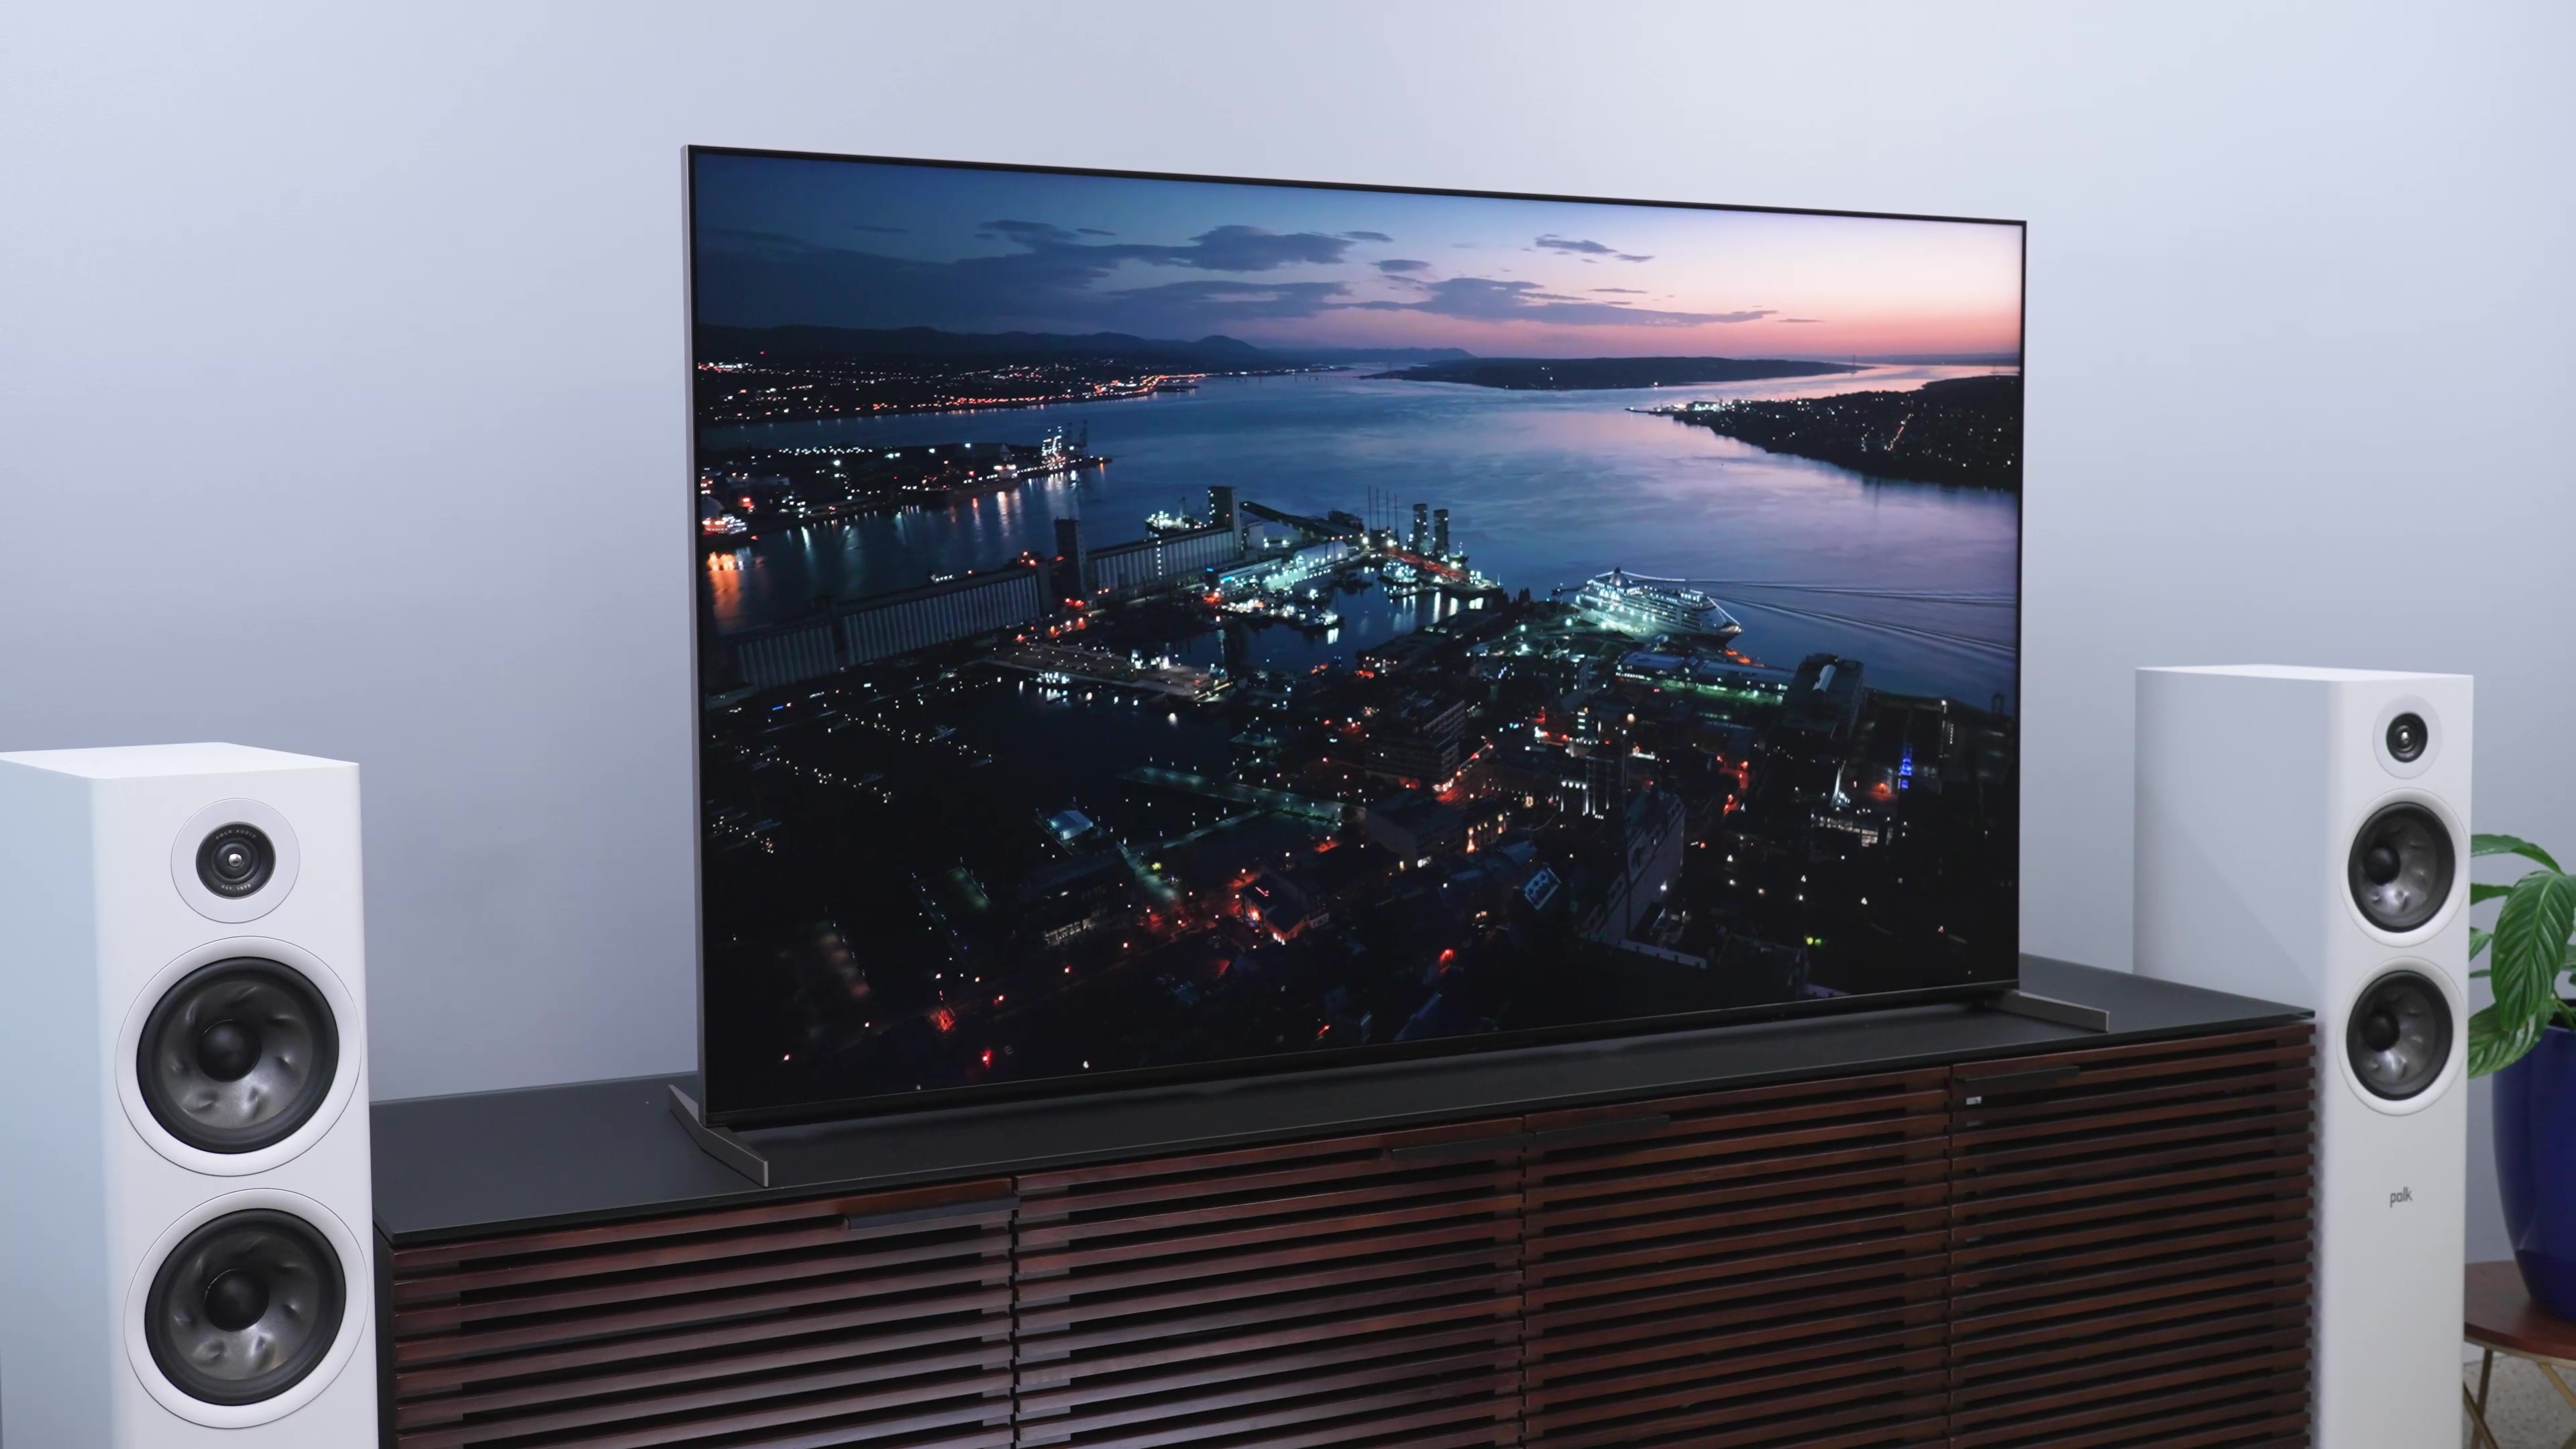 Sony Bravia X80K TV Review: Sony's entry-level LED TV has flagship